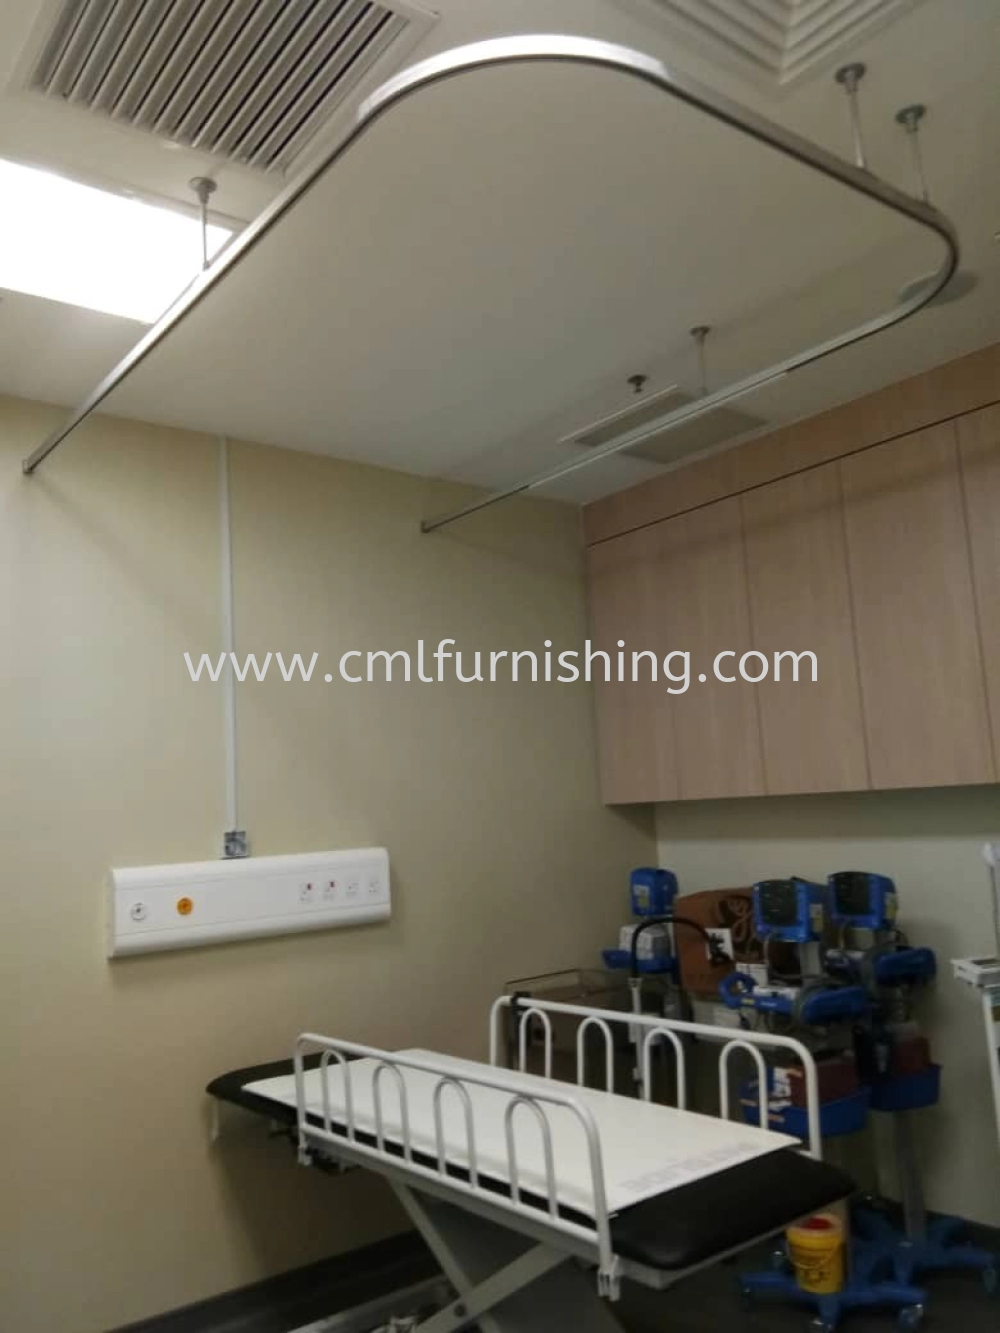 Hospital Track and Curtain